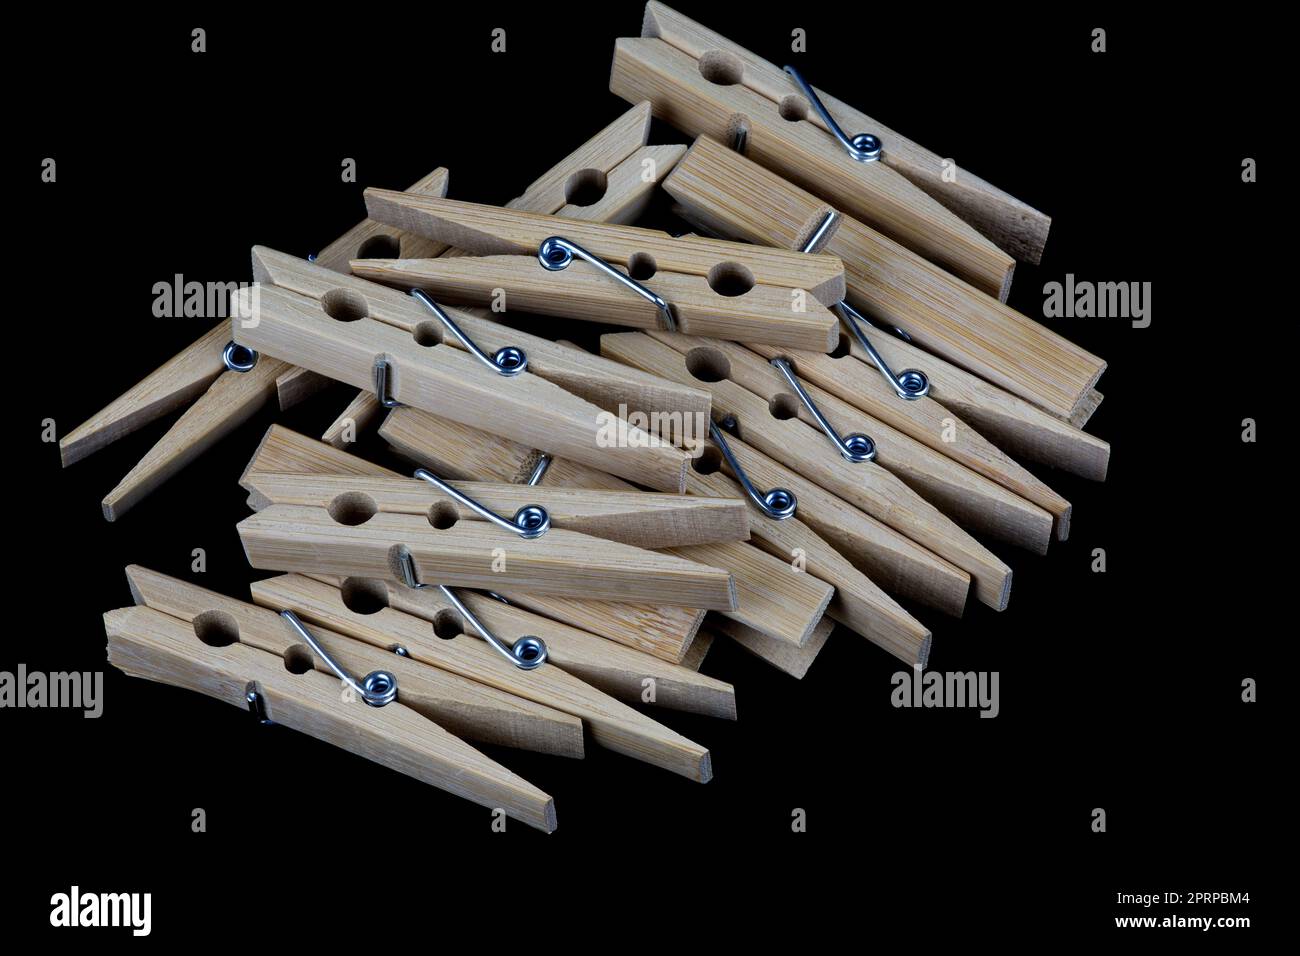 A pile of wooden clothes pegs isolated on a black background Stock Photo